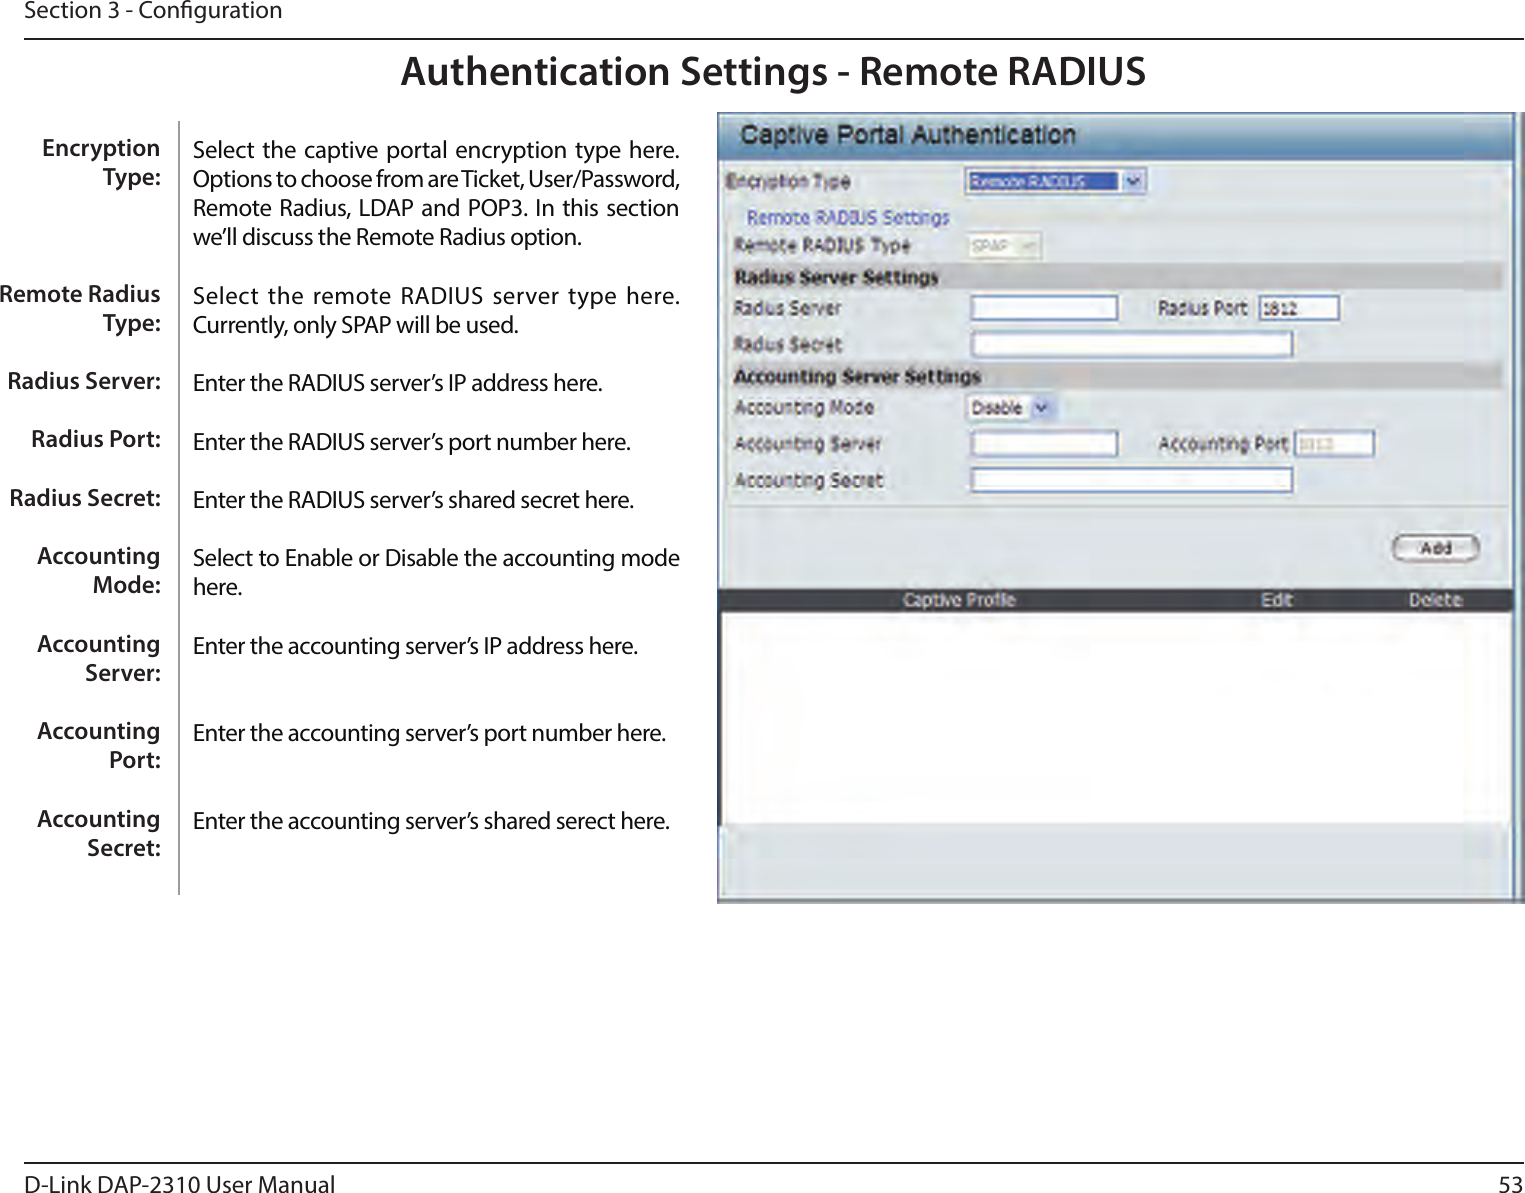 53D-Link DAP-2310 User ManualSection 3 - CongurationAuthentication Settings - Remote RADIUSSelect the captive portal encryption type here. Options to choose from are Ticket, User/Password, Remote Radius, LDAP and POP3. In this section we’ll discuss the Remote Radius option.Select  the remote RADIUS server type here. Currently, only SPAP will be used.Enter the RADIUS server’s IP address here.Enter the RADIUS server’s port number here.Enter the RADIUS server’s shared secret here.Select to Enable or Disable the accounting mode here.Enter the accounting server’s IP address here.Enter the accounting server’s port number here.Enter the accounting server’s shared serect here. Encryption Type:Remote Radius Type:Radius Server:Radius Port:Radius Secret:Accounting Mode:Accounting Server:Accounting Port:Accounting Secret: